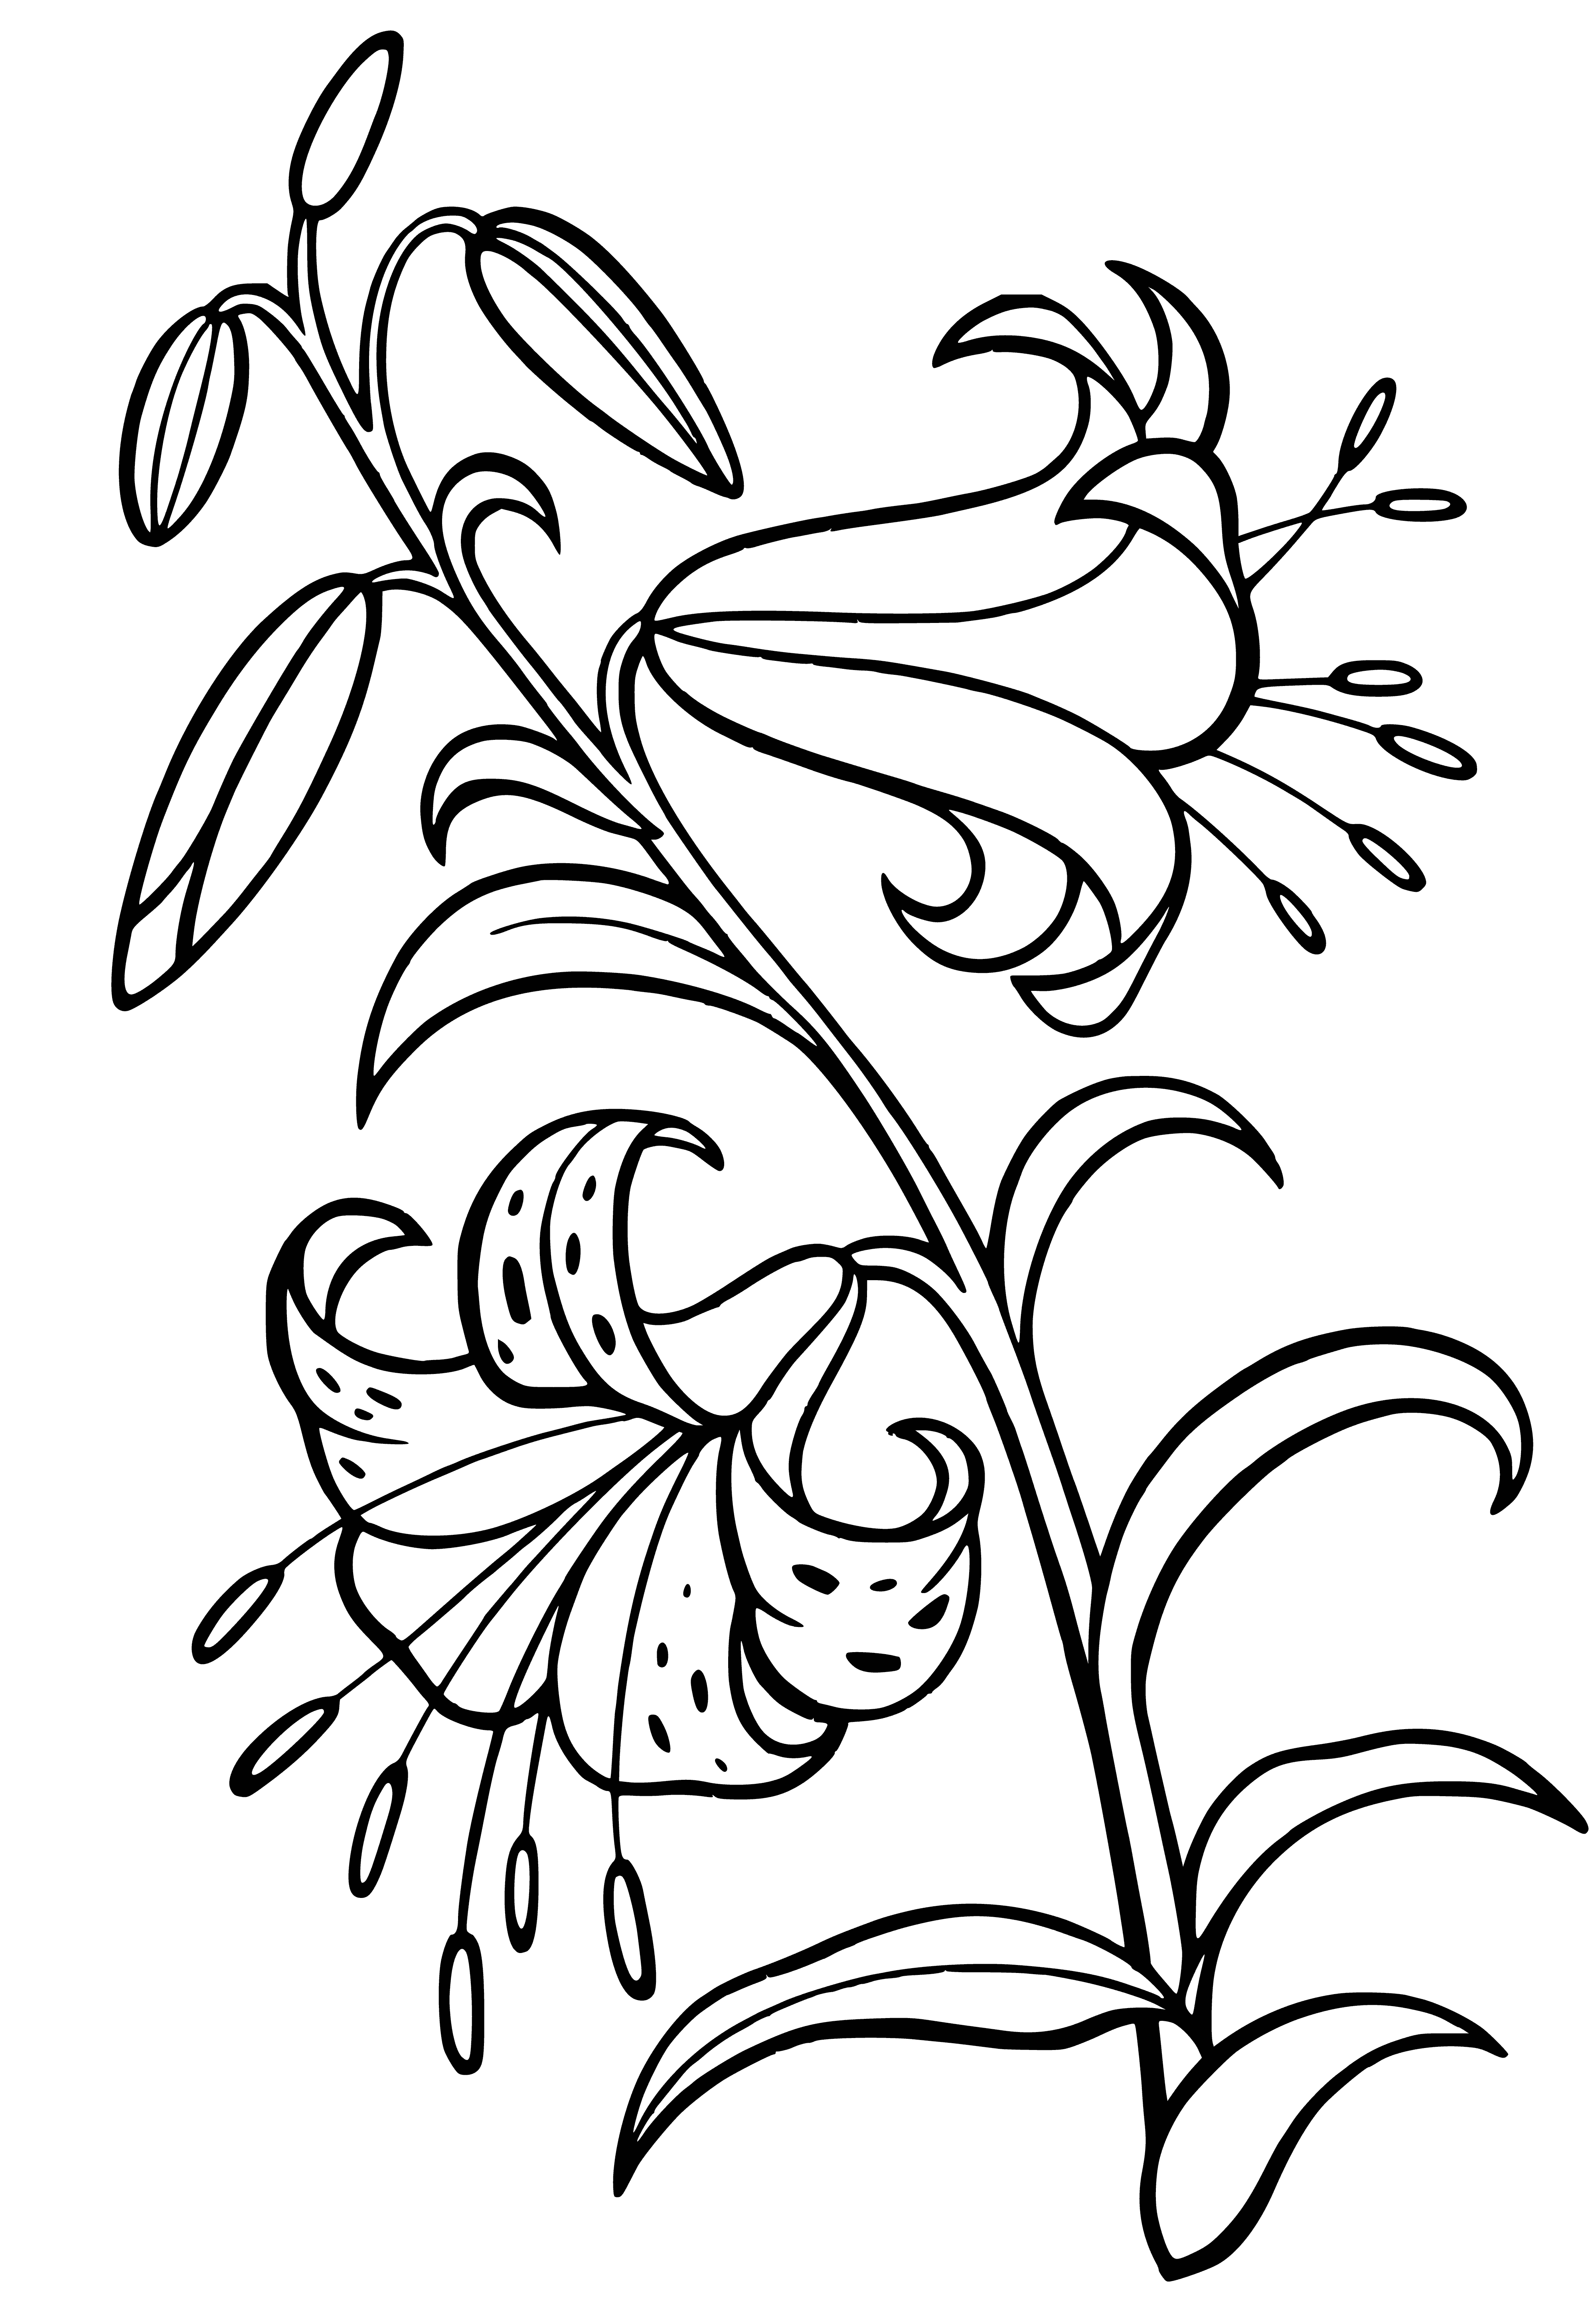 coloring page: Tall, thin stem w/ light green leaves & white flower w/ yellow center & light purple petal outlines.